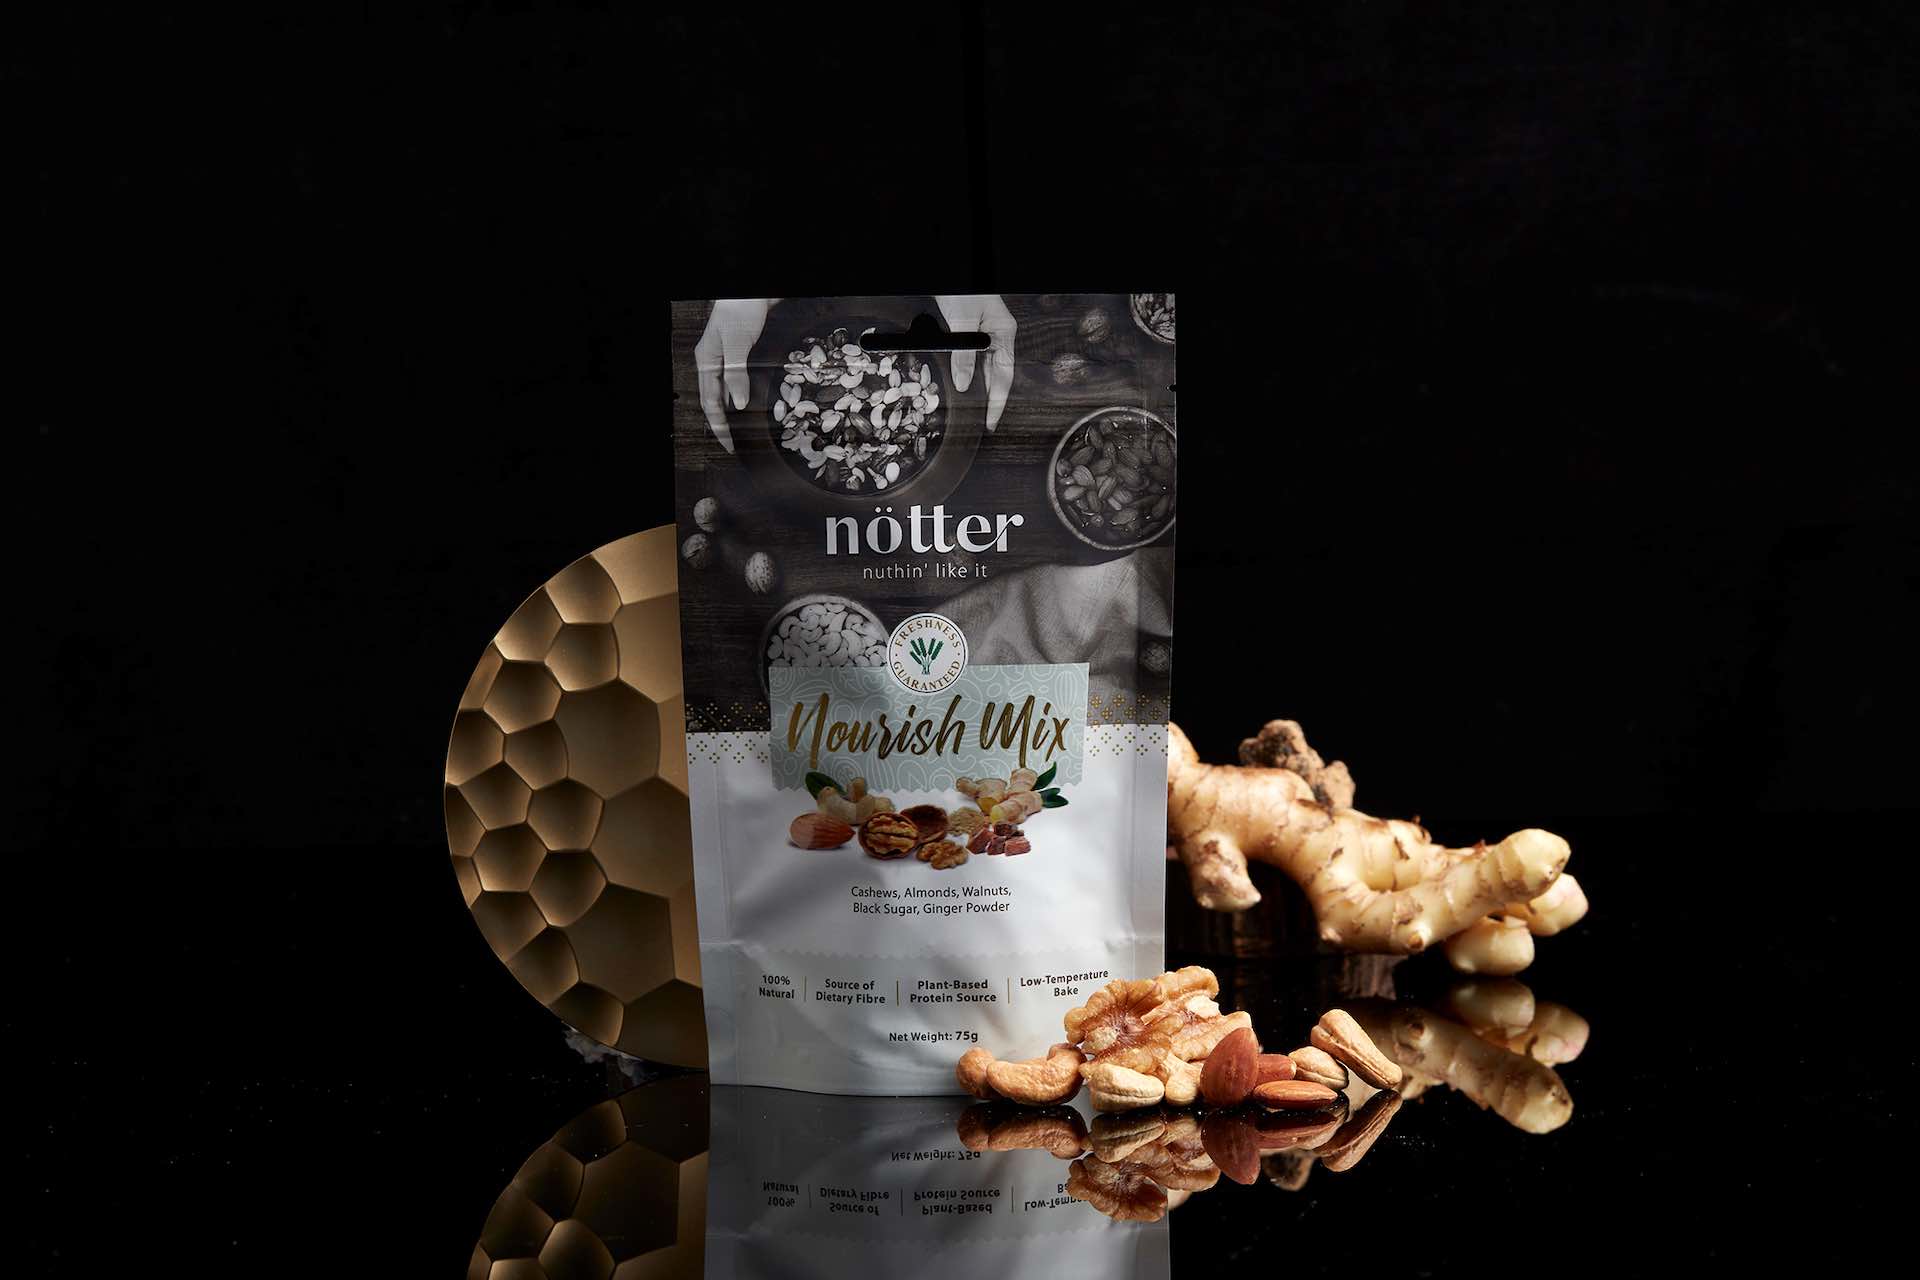 MUSE Design Winners - Notter Nuts